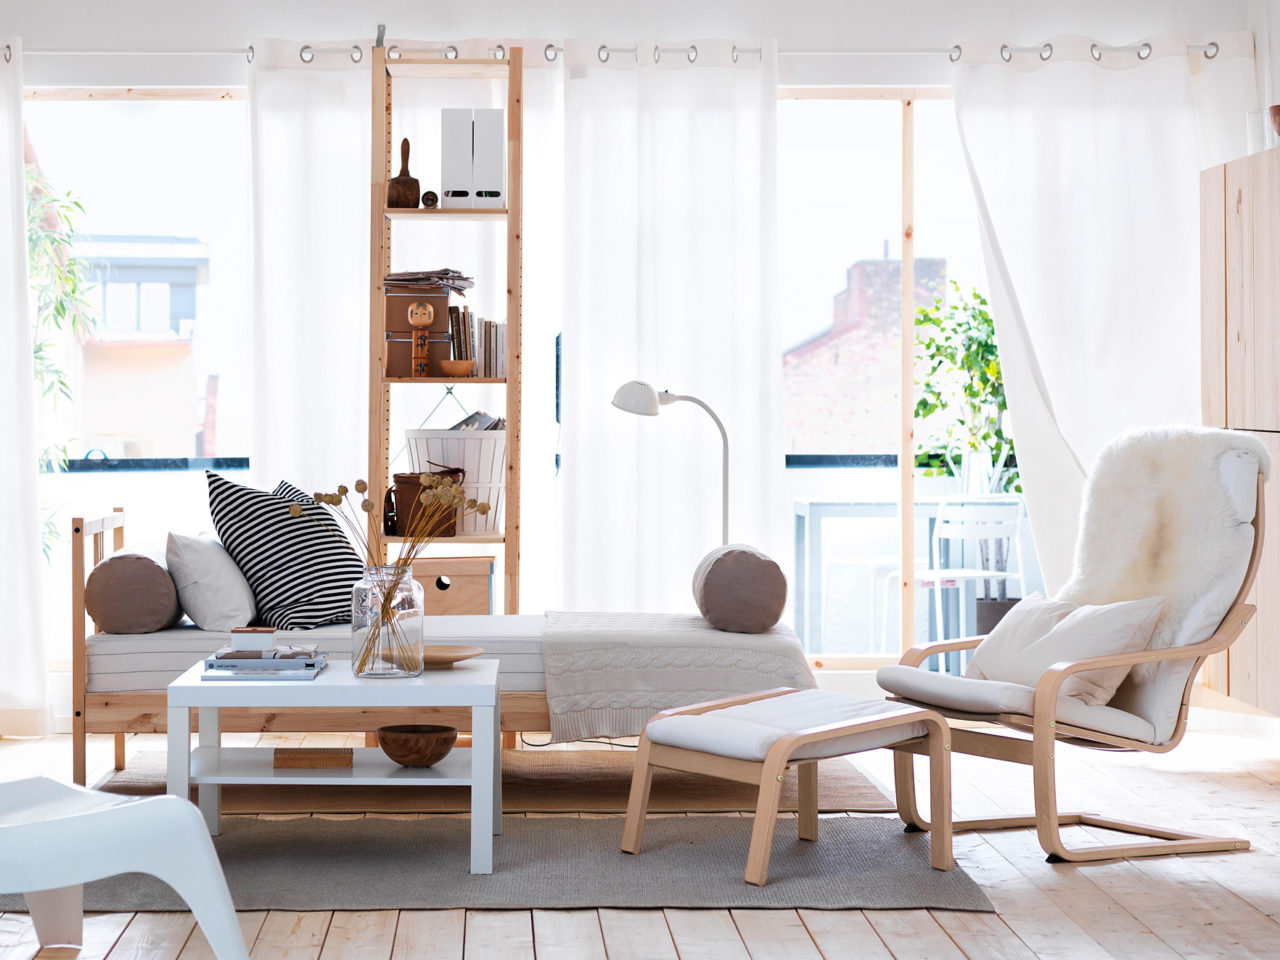 A light room with sunlit floors to skylights, a bed and shelving unit in light wood, and an armchair with footstool, model POÄNG.